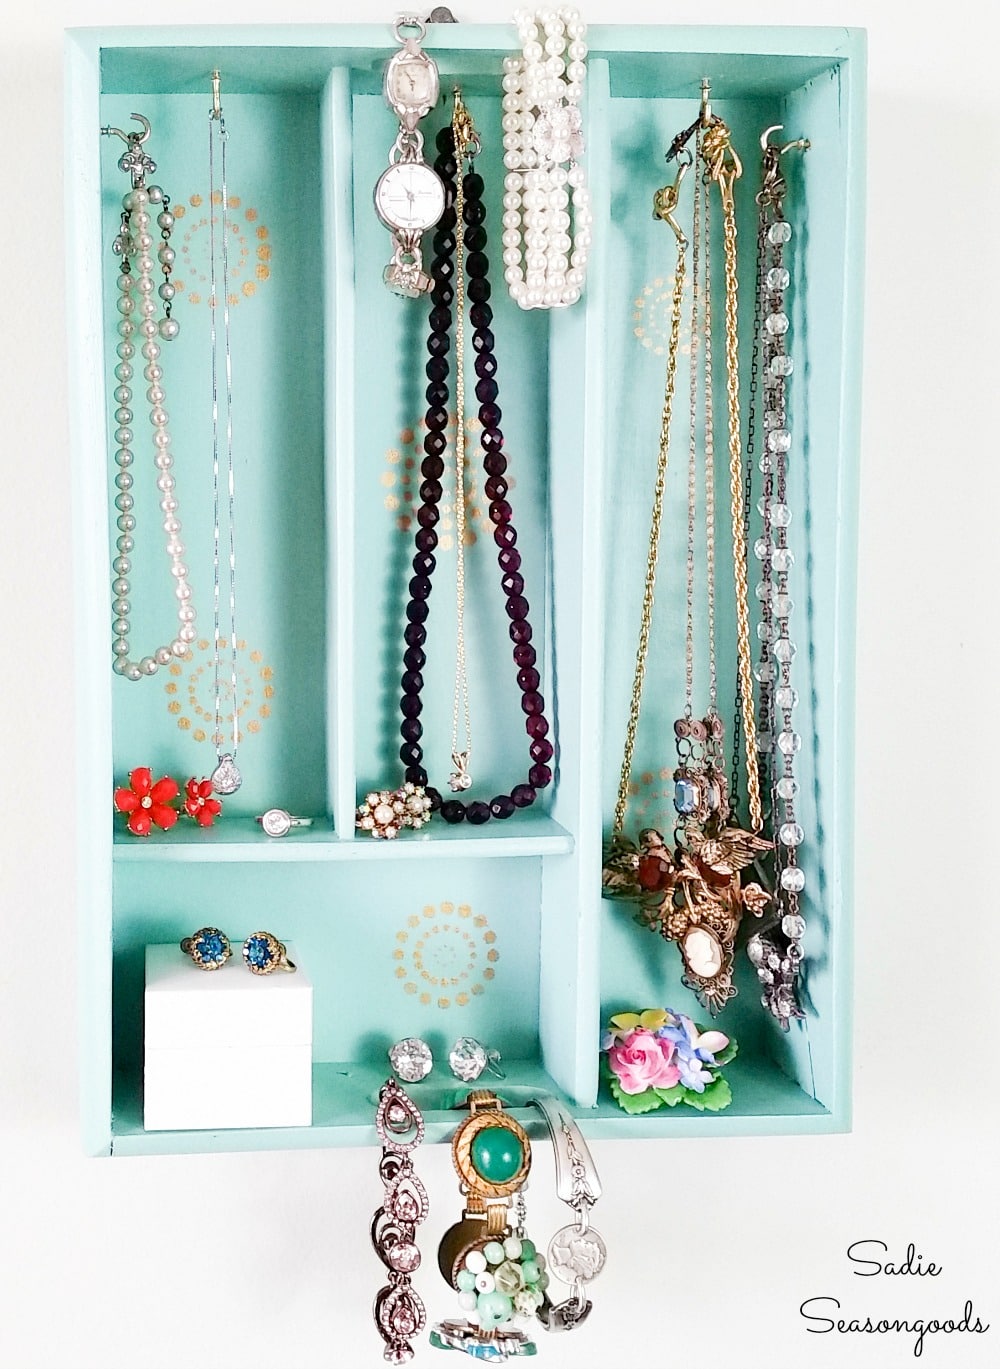 Boho Storage for Jewelry from a Silverware Tray or Utensil Tray